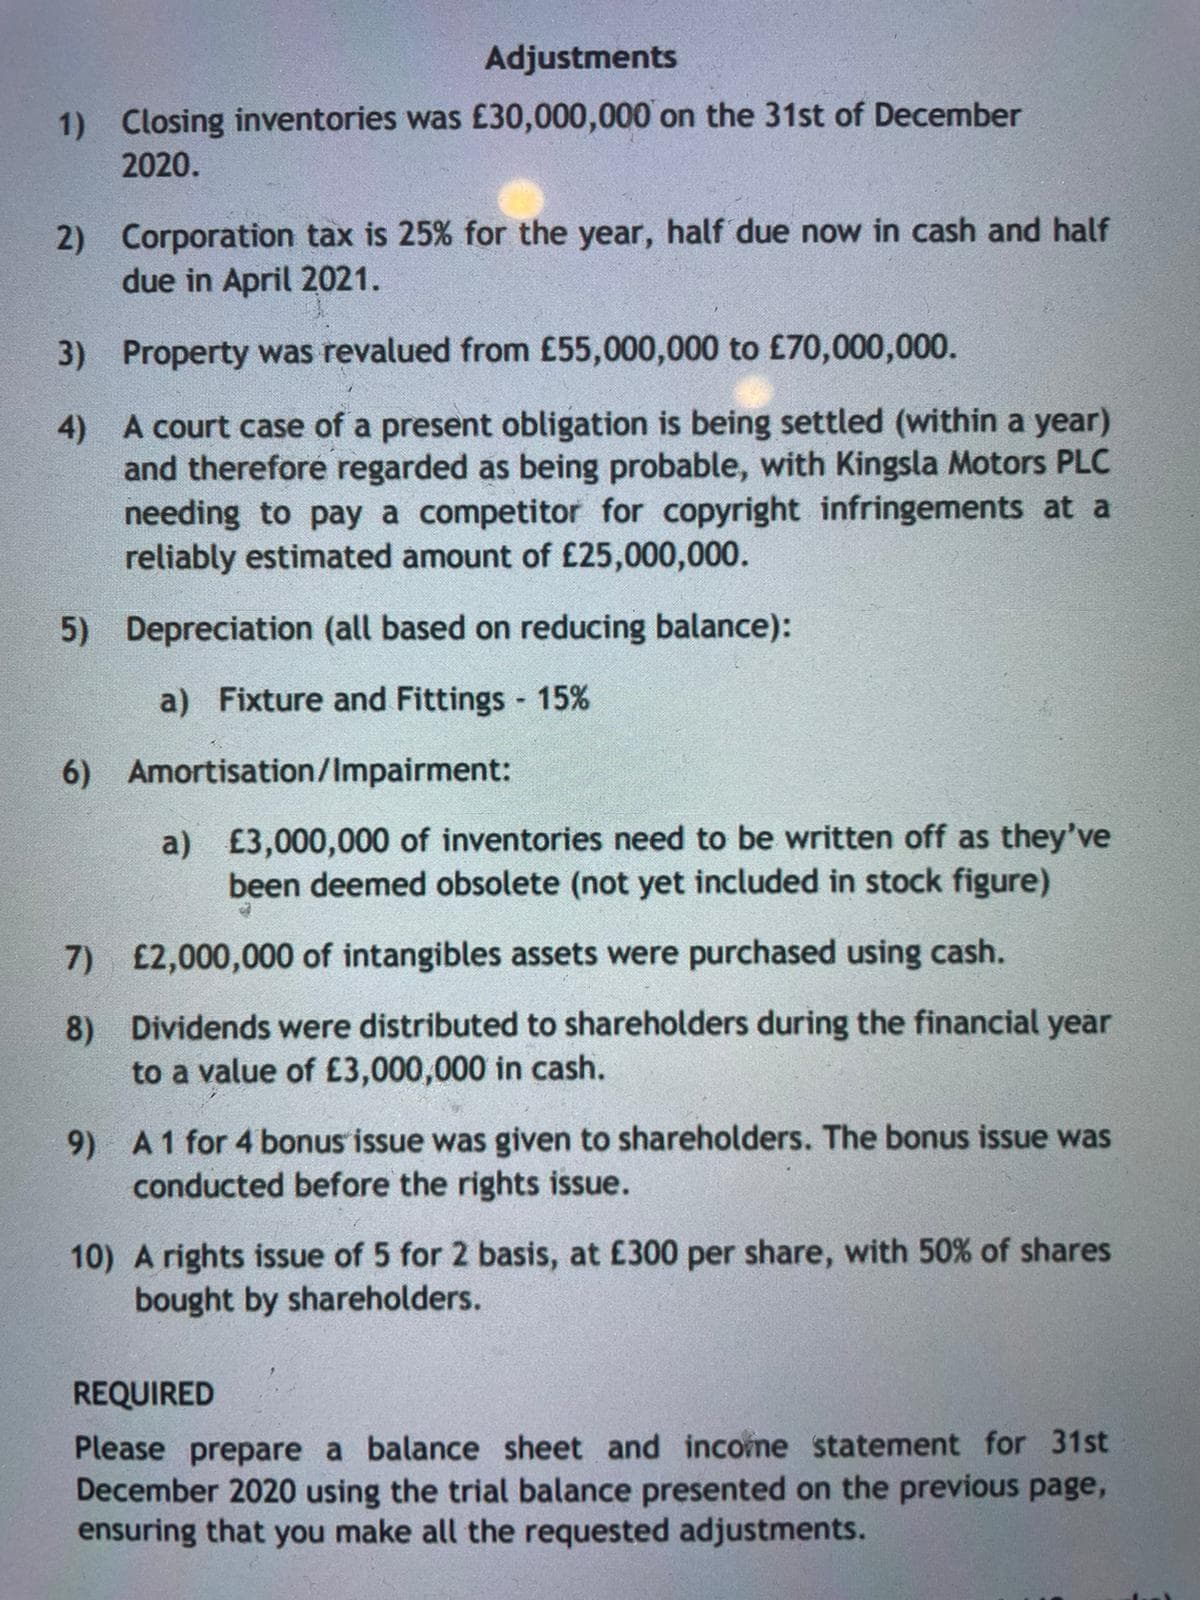 Adjustments
1) Closing inventories was £30,000,000 on the 31st of December
2020.
2) Corporation tax is 25% for the year, half due now in cash and half
due in April 2021.
3) Property was revalued from £55,000,000 to £70,000,000.
4) A court case of a present obligation is being settled (within a year)
and therefore regarded as being probable, with Kingsla Motors PLC
needing to pay a competitor for copyright infringements at a
reliably estimated amount of £25,000,000.
5) Depreciation (all based on reducing balance):
a) Fixture and Fittings 15%
6) Amortisation/Impairment:
a) £3,000,000 of inventories need to be written off as they've
been deemed obsolete (not yet included in stock figure)
7) £2,000,000 of intangibles assets were purchased using cash.
8) Dividends were distributed to shareholders during the financial year
to a value of £3,000,000 in cash.
9) A1 for 4 bonus issue was given to shareholders. The bonus issue was
conducted before the rights issue.
10) A rights issue of 5 for 2 basis, at £300 per share, with 50% of shares
bought by shareholders.
REQUIRED
Please prepare a balance sheet and income statement for 31st
December 2020 using the trial balance presented on the previous page,
ensuring that you make all the requested adjustments.
